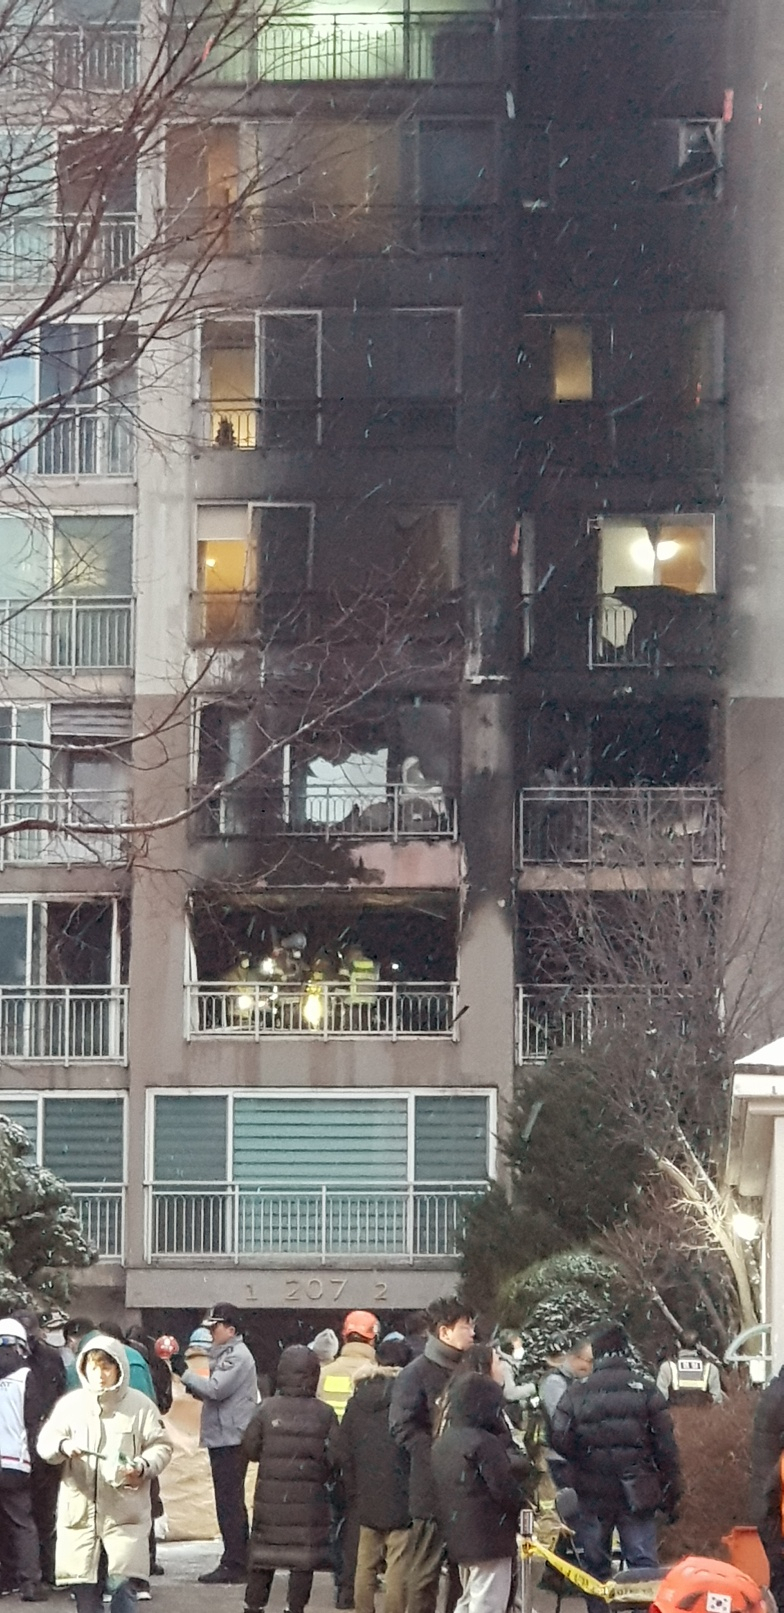 This photo, provided by a citizen on Monday, shows parts of an apartment building charred by a fire in Seoul's Dobong district at around 4:58 a.m. (Yonhap)